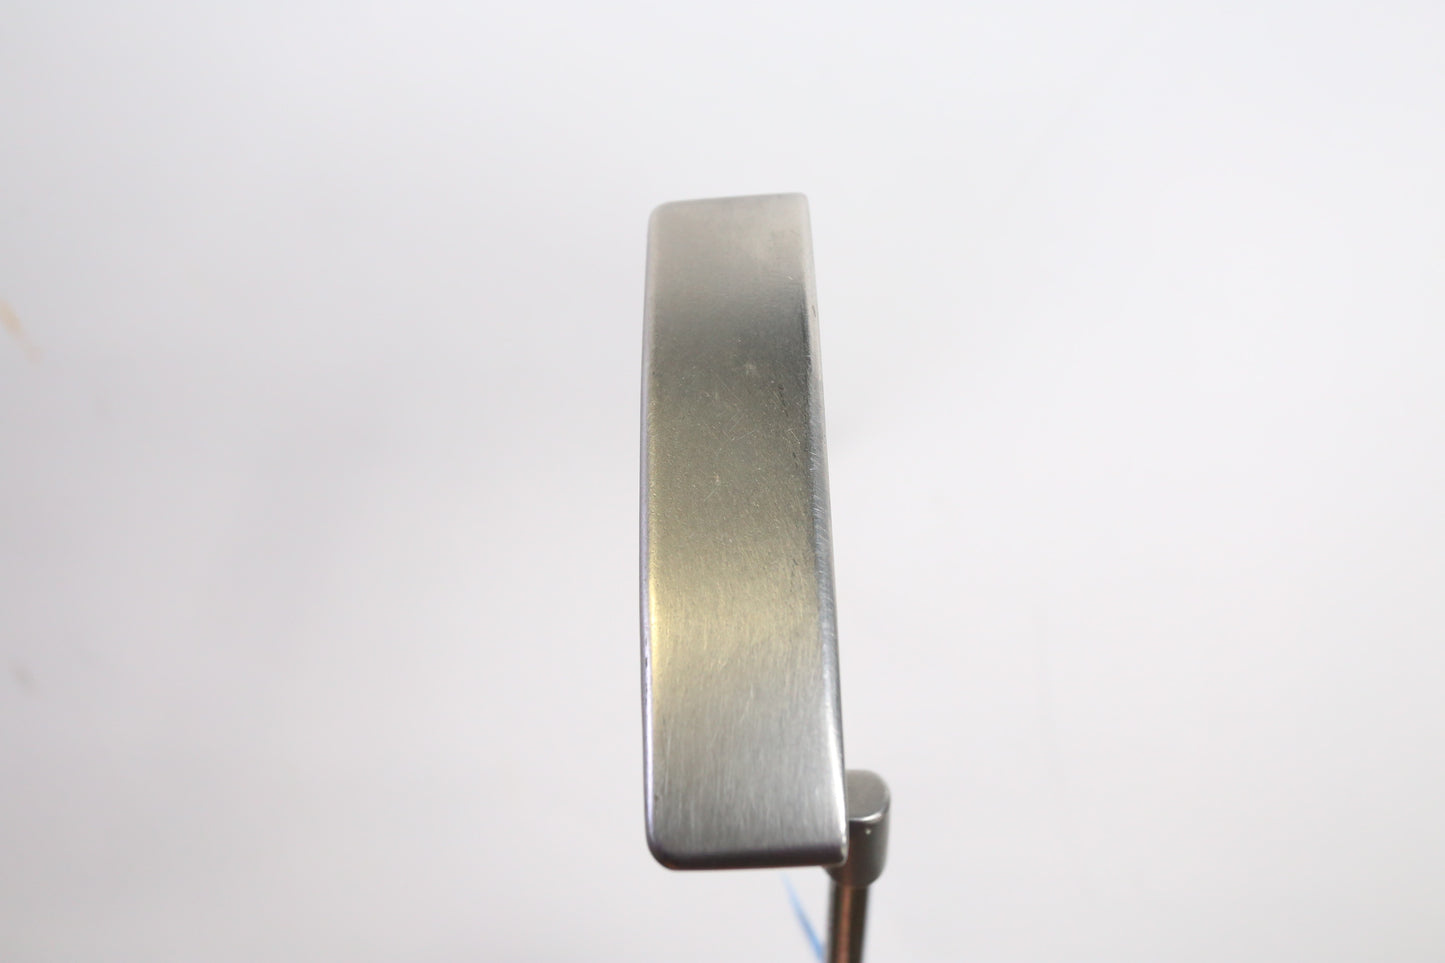 Used Ping 2021 Anser 2 Putter - Right-Handed - 34 in - Blade